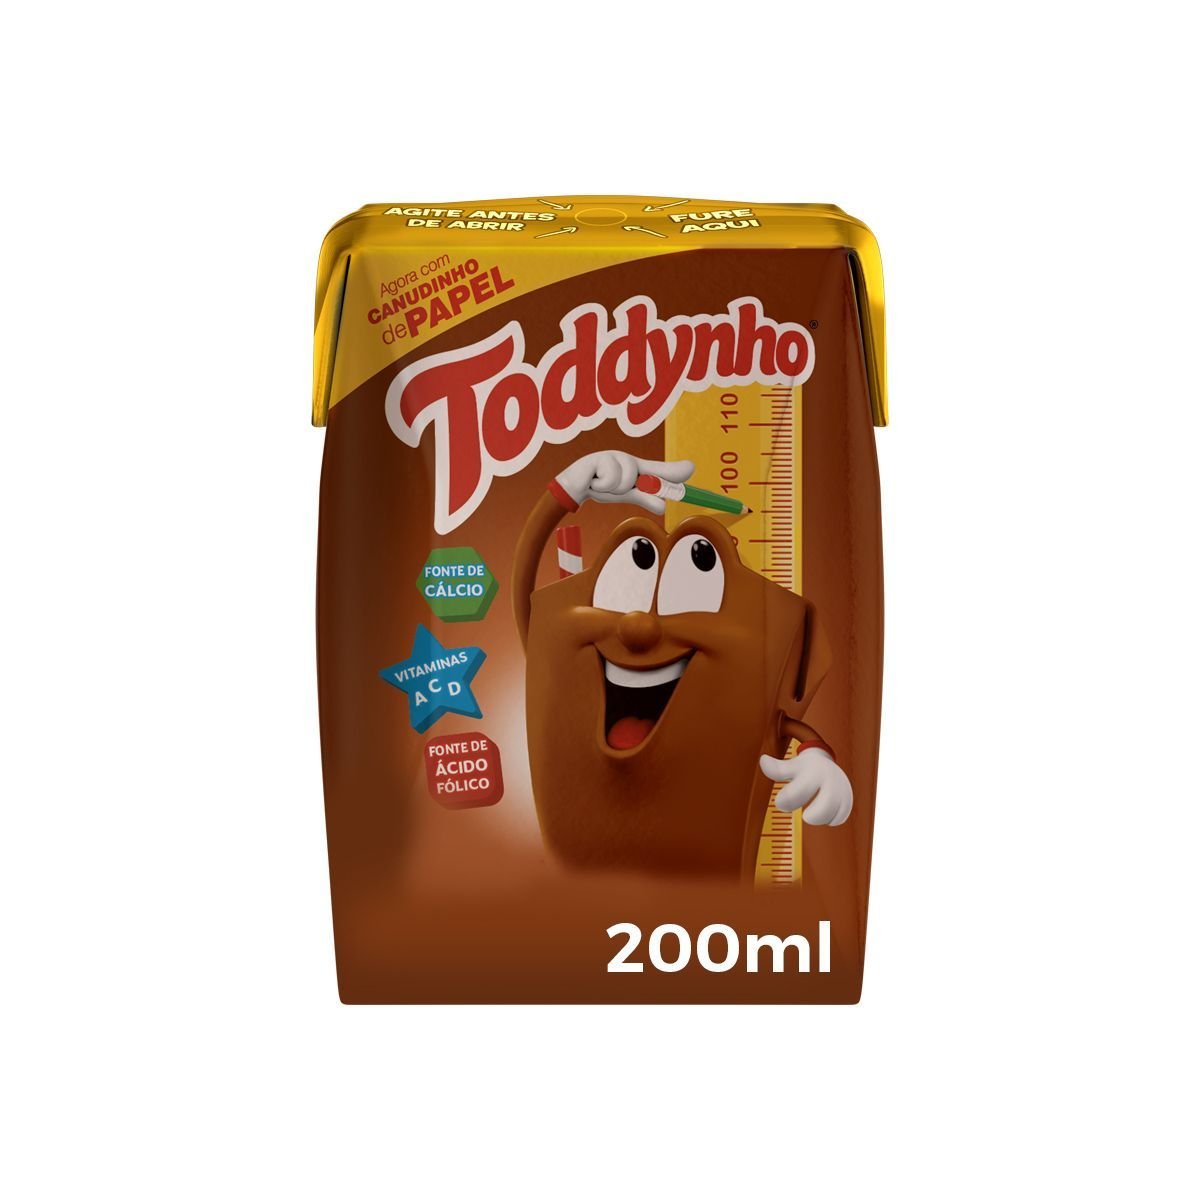 Toddynho, Brands of the World™